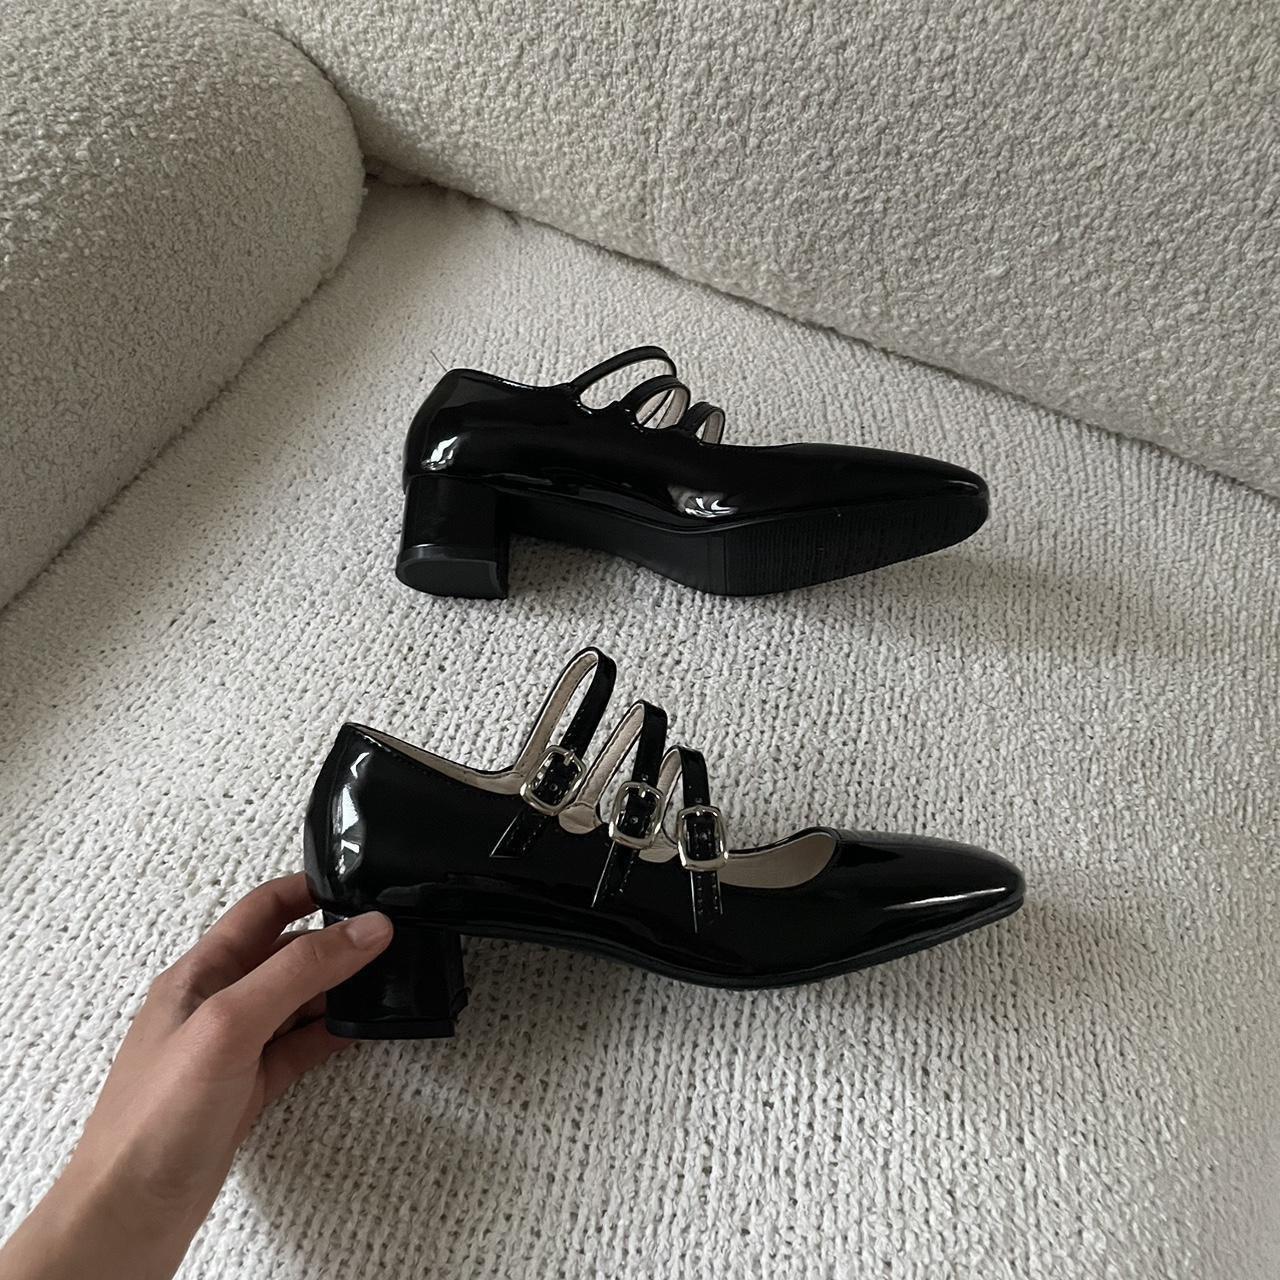 For Carlie Black strappy mary Janes shoes Light... - Depop